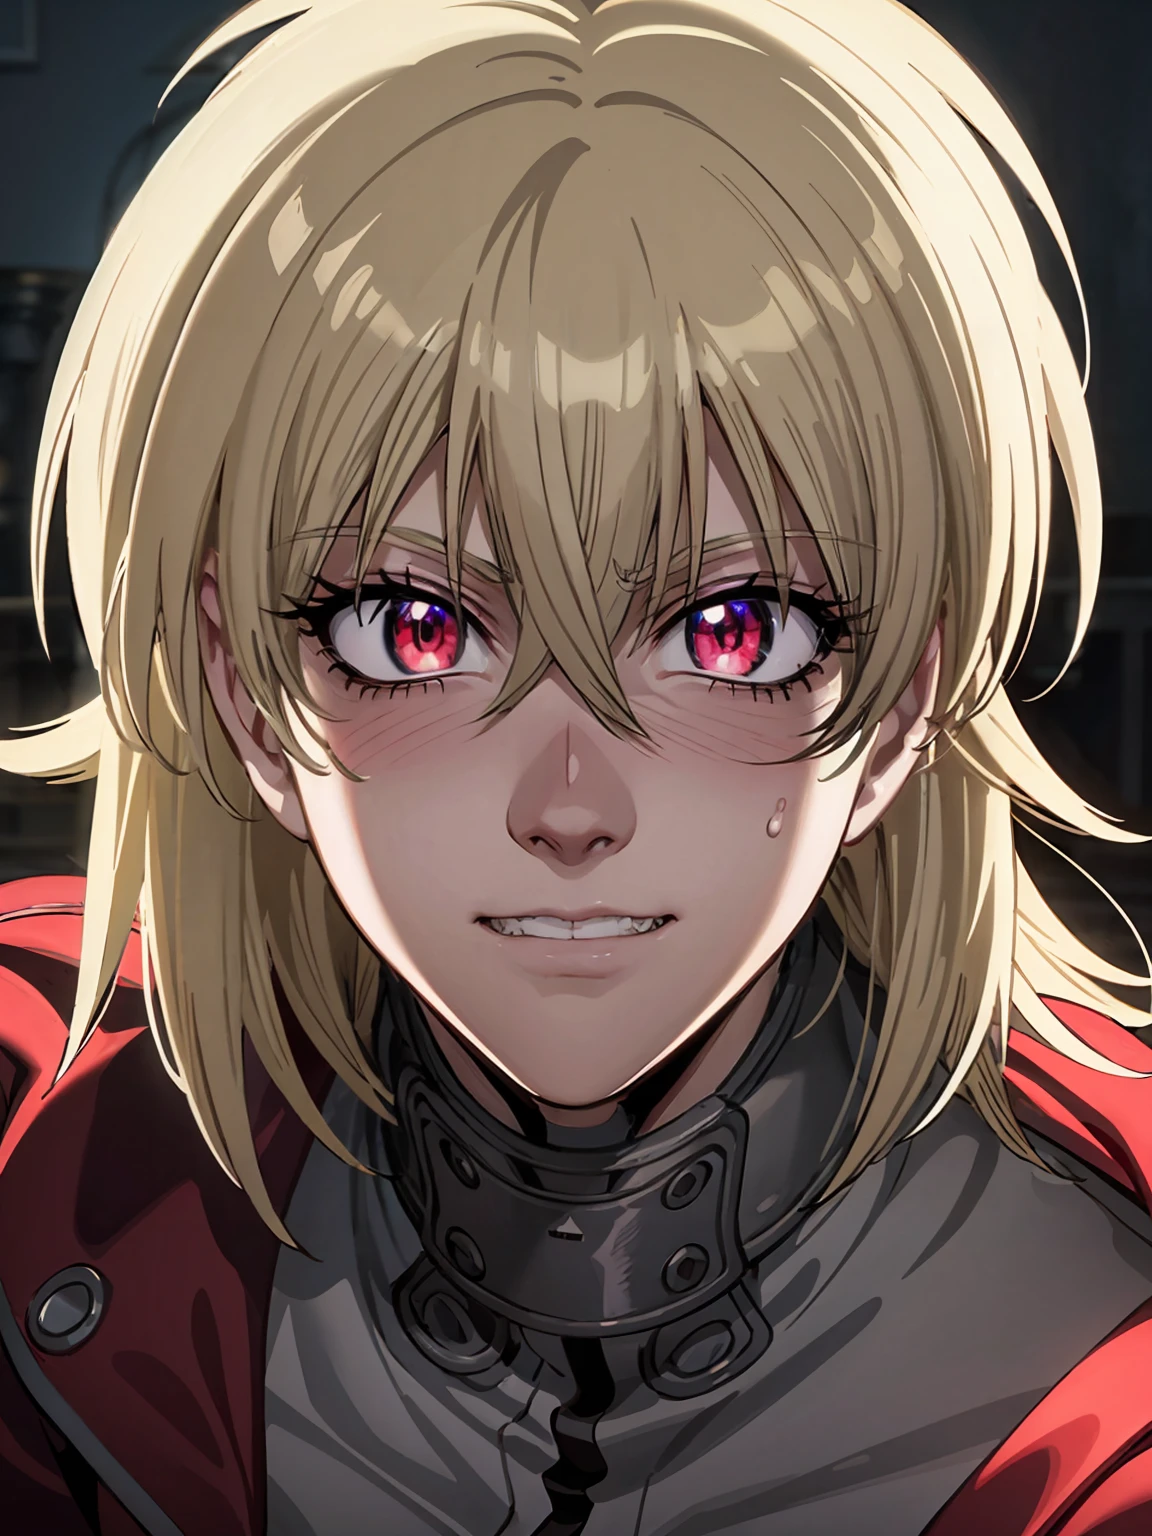 Seras Victoria,detailed face,vampire,handsome face,vampire fangs,red eyes,intense stare,smooth skin,pale complexion,flowing hair,perfectly arched eyebrows,sculpted cheekbones,masterpiece:1.2,ultra-detailed,photorealistic,vivid colors,dark and moody lighting"